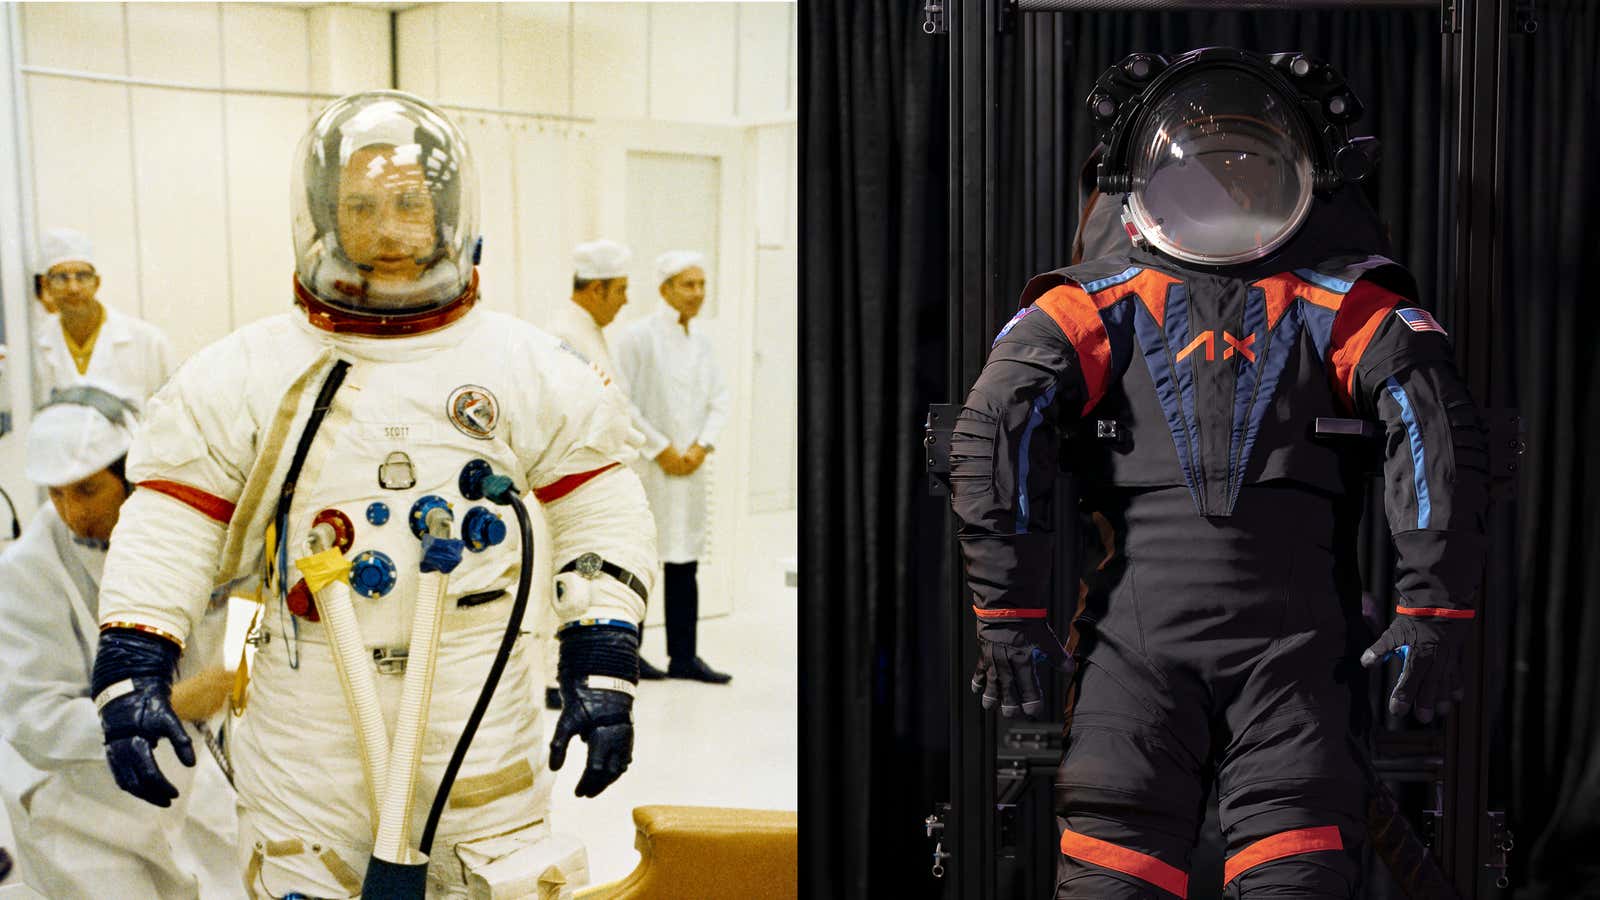 NASA's new Moon suit is a giant leap forward